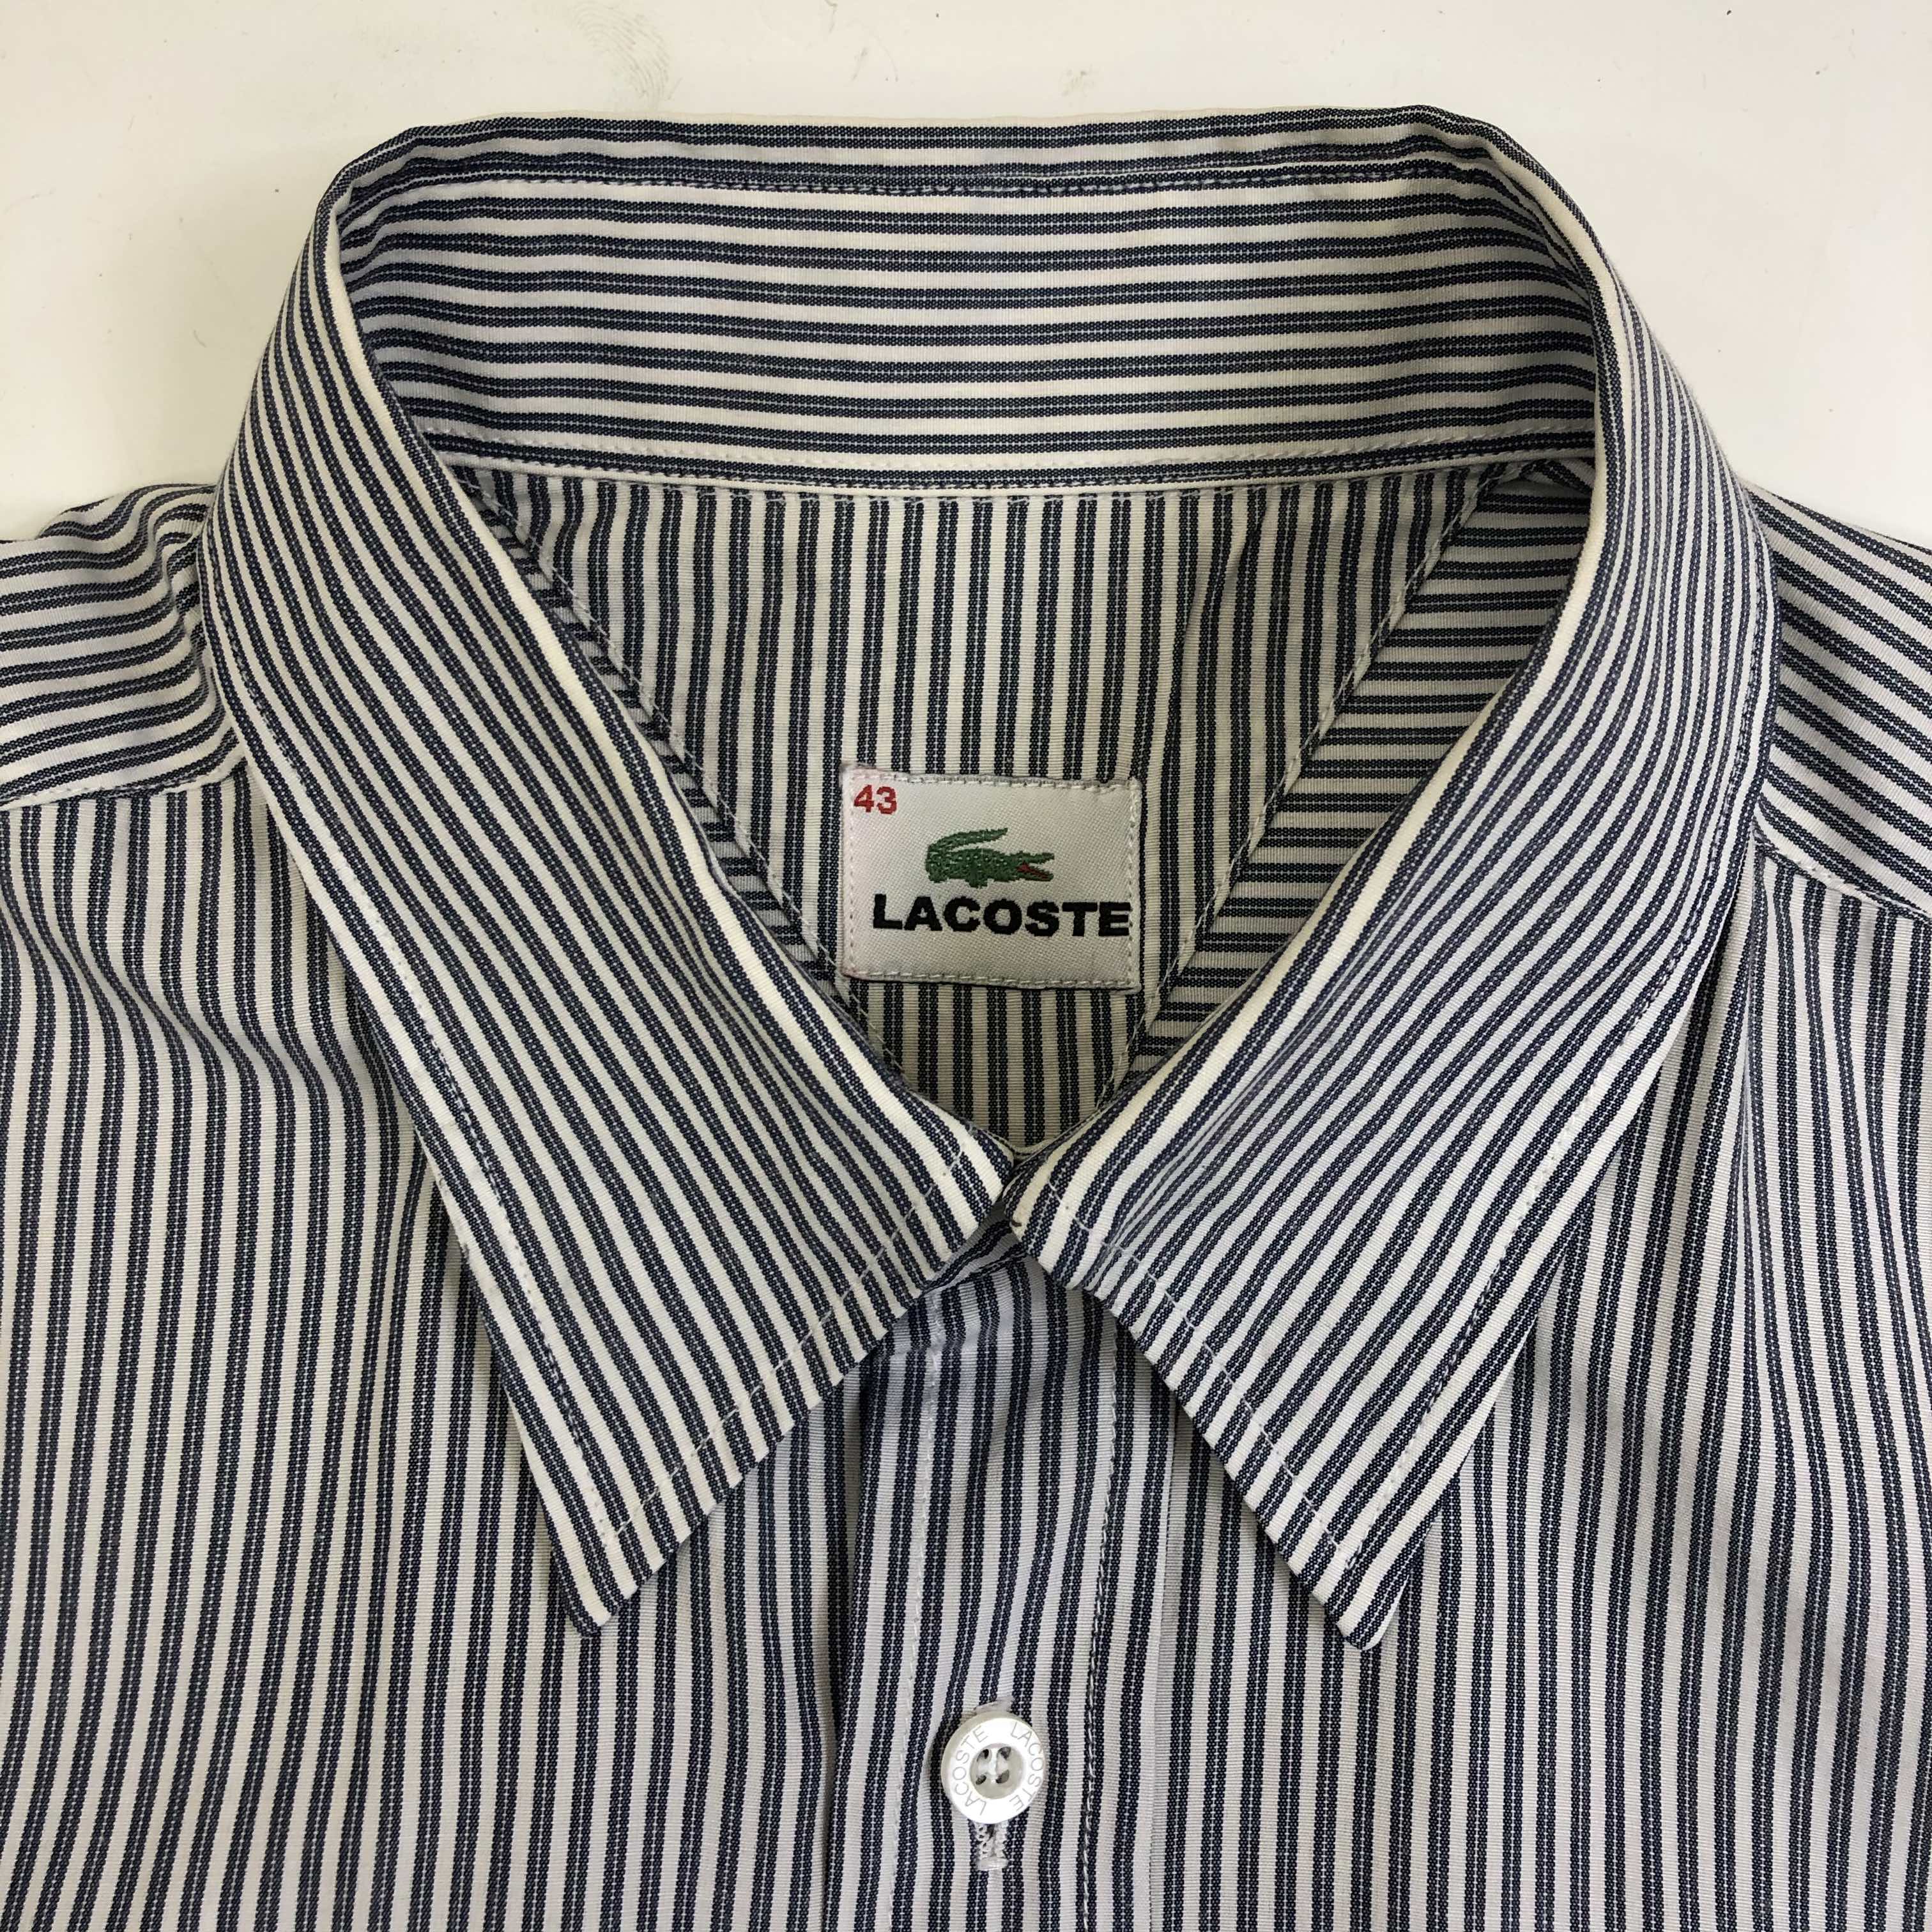 Lacoste Striped Shirt (Long Sleeve)